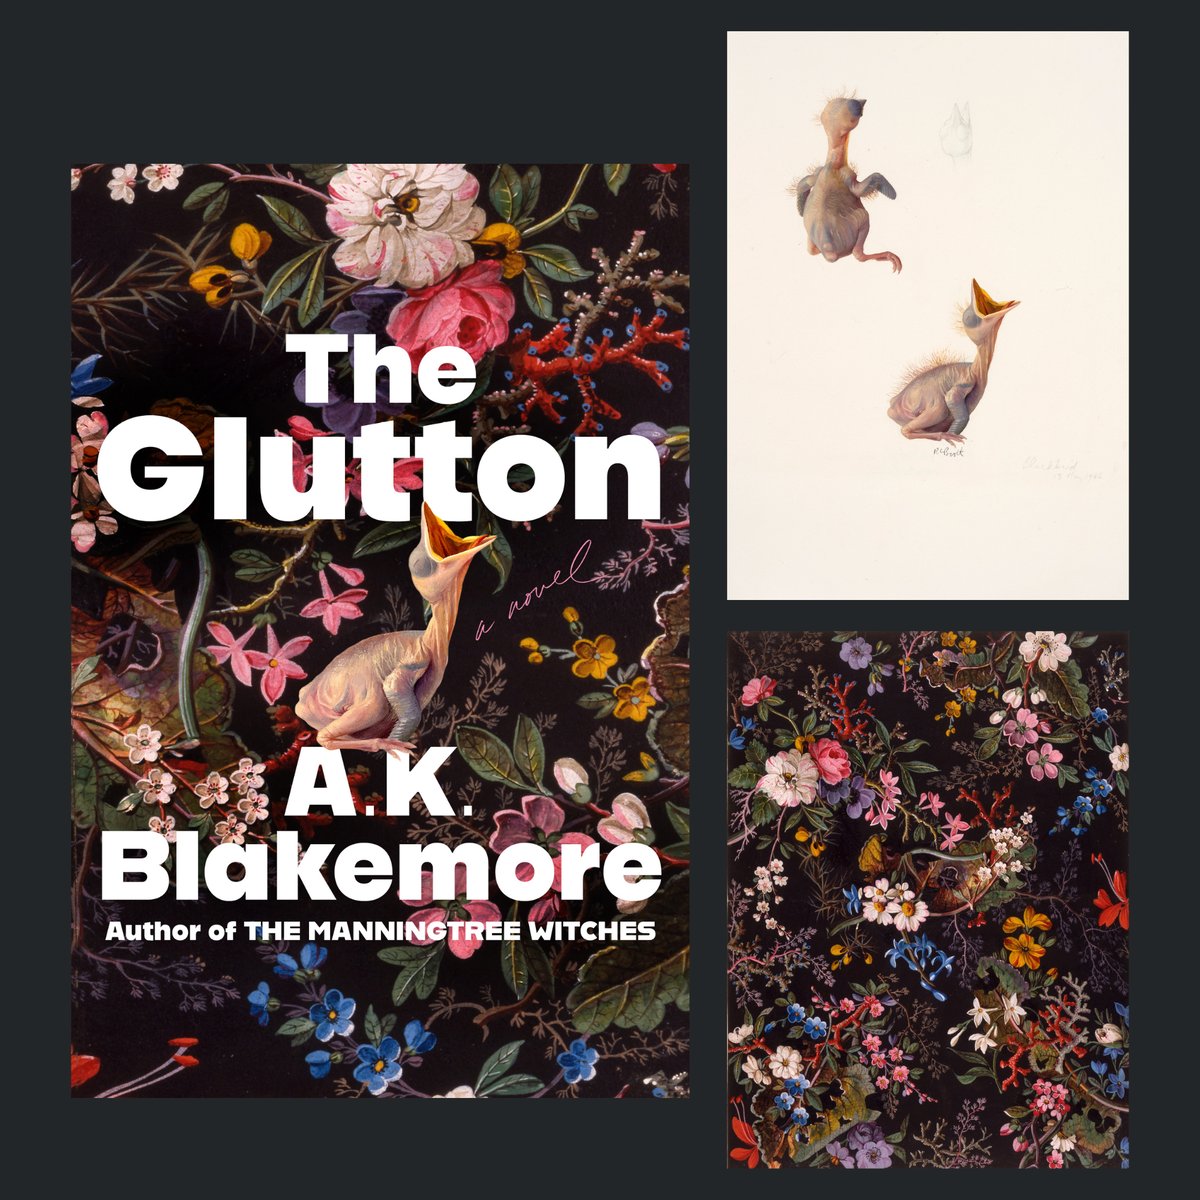 Alicia Tatone - The Glutton by A.K. Blackmore. Published by Simon & Schuster, United States.